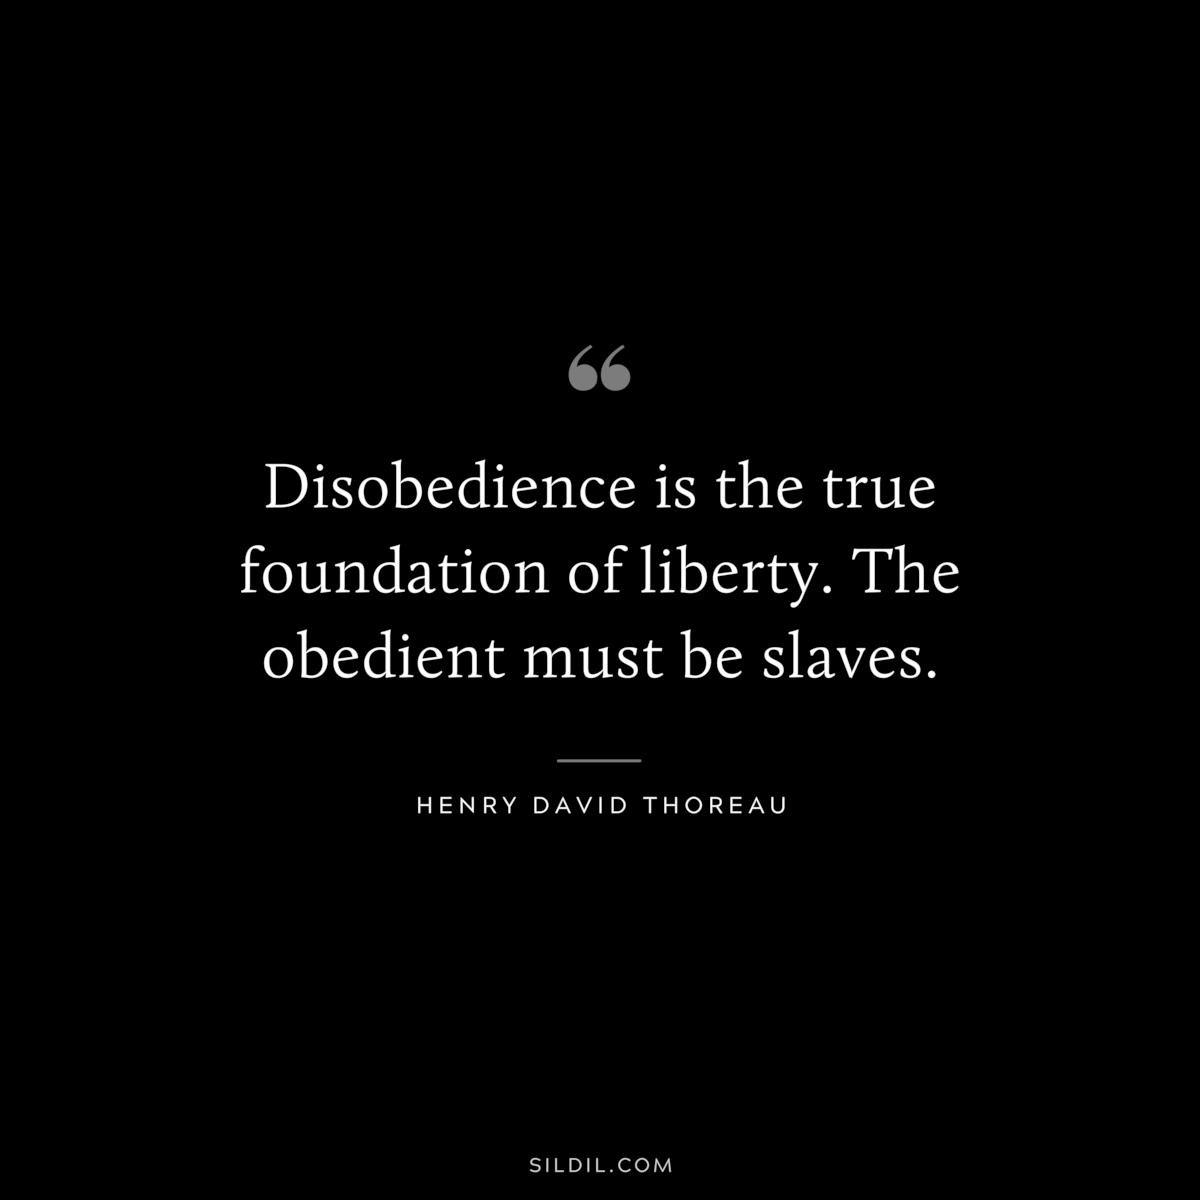 Disobedience is the true foundation of liberty. The obedient must be slaves. — Henry David Thoreau